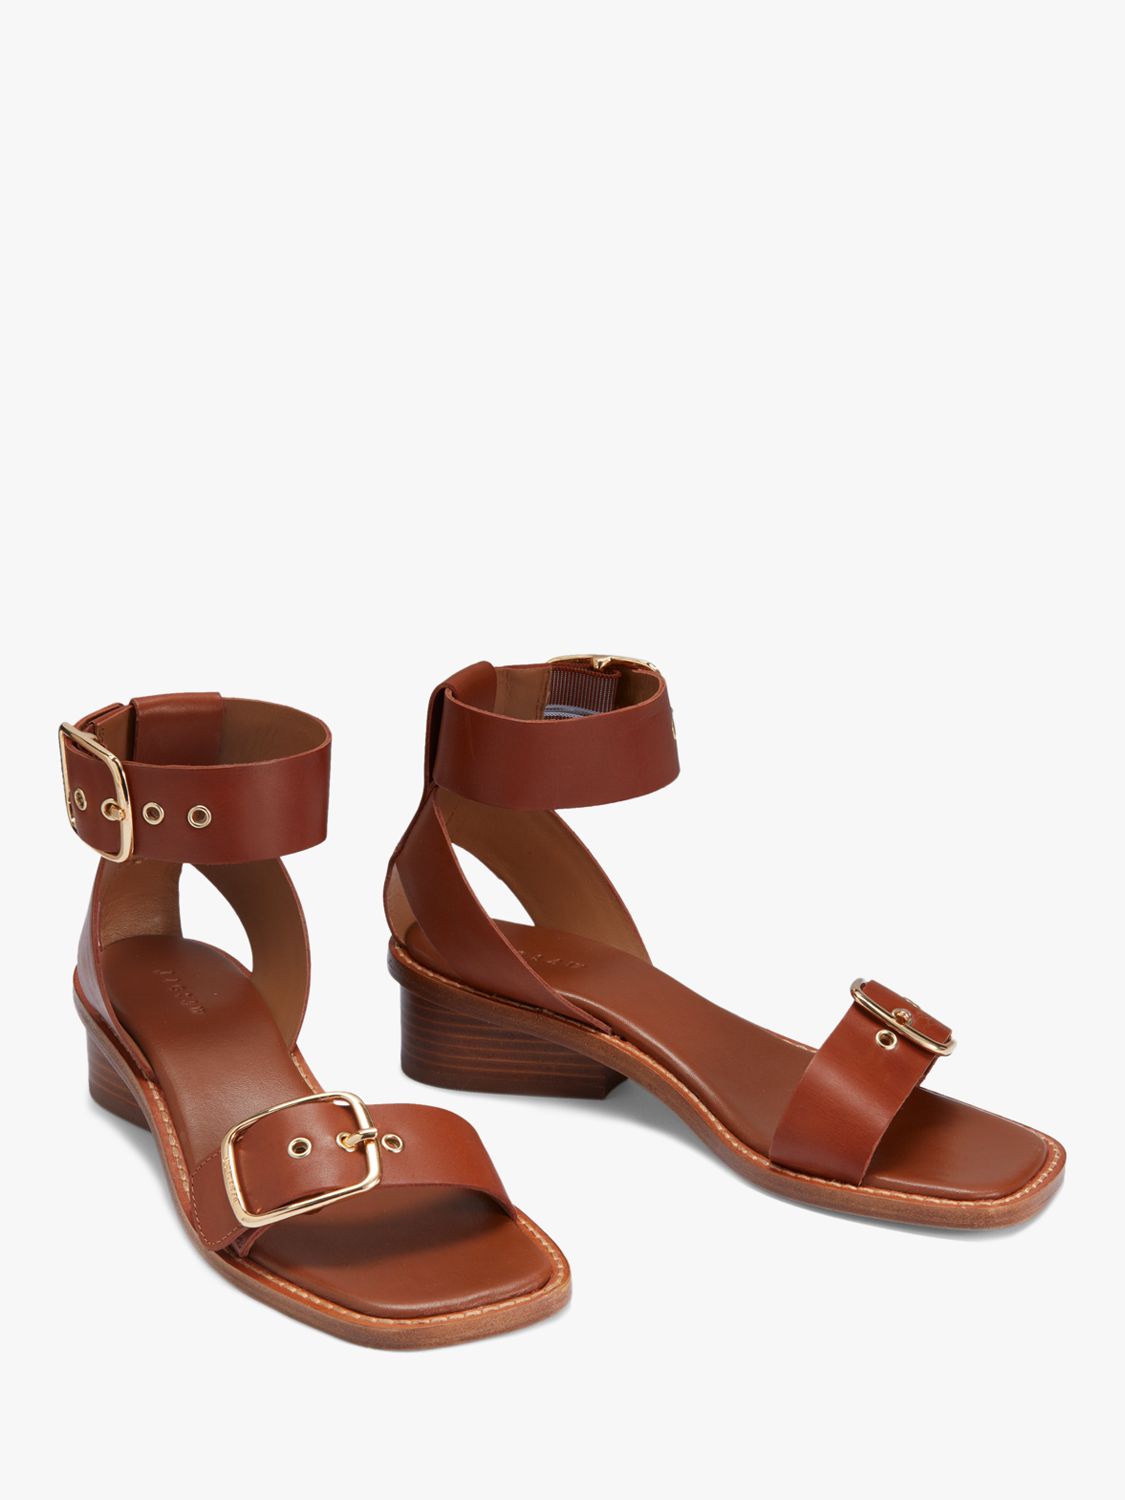 Jigsaw Oxley Leather Heeled Sandals, Tan at John Lewis & Partners